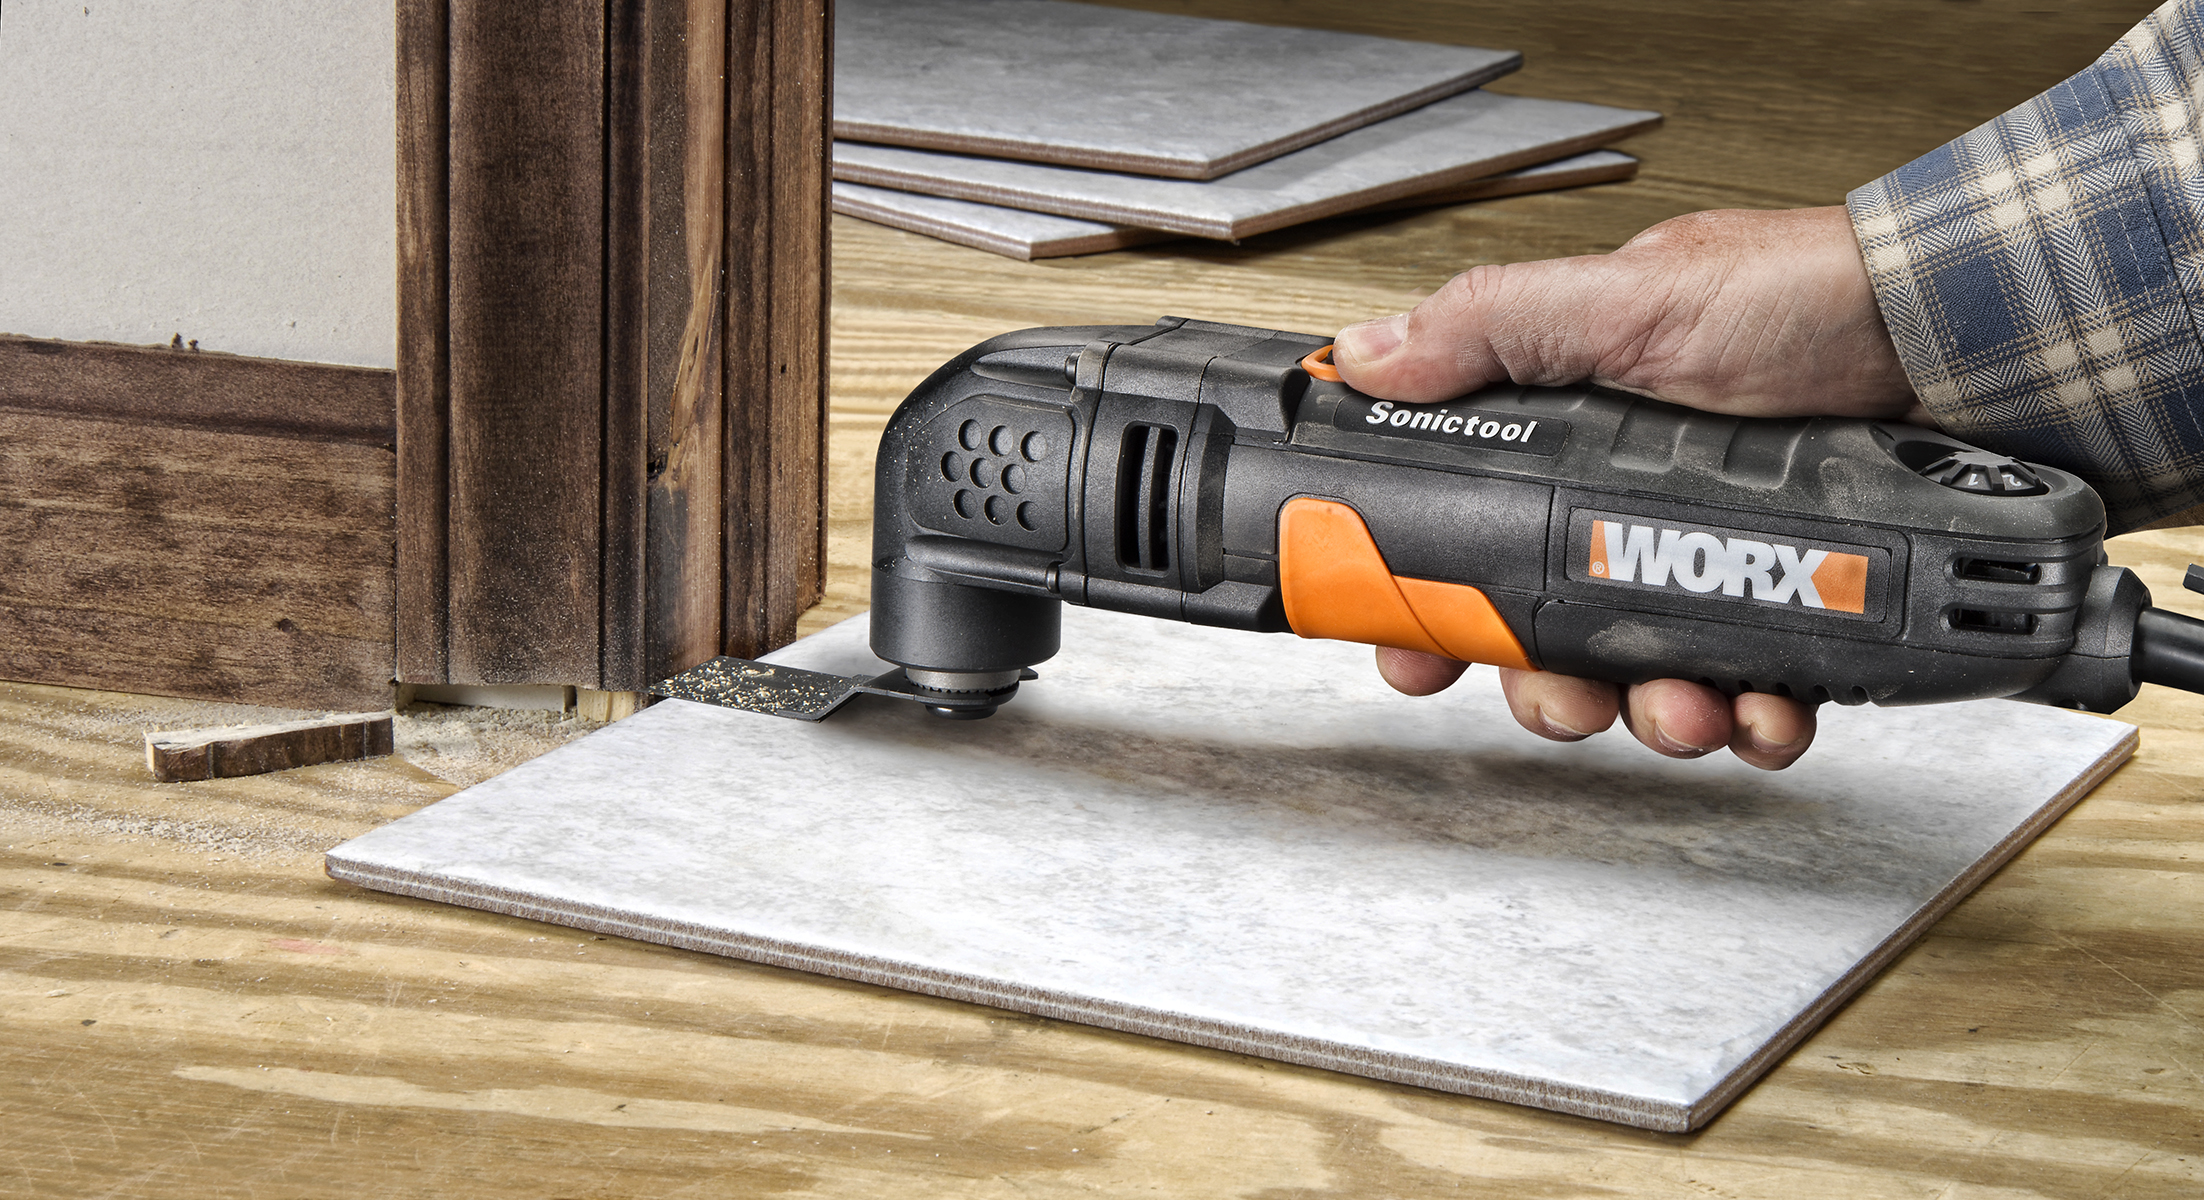 WORX 3.0 Amp Oscillating Tool handles projects requiring cutting, sawing, sanding, scraping, rasping, polishing, shaping and removal of hardened grout and adhesives.